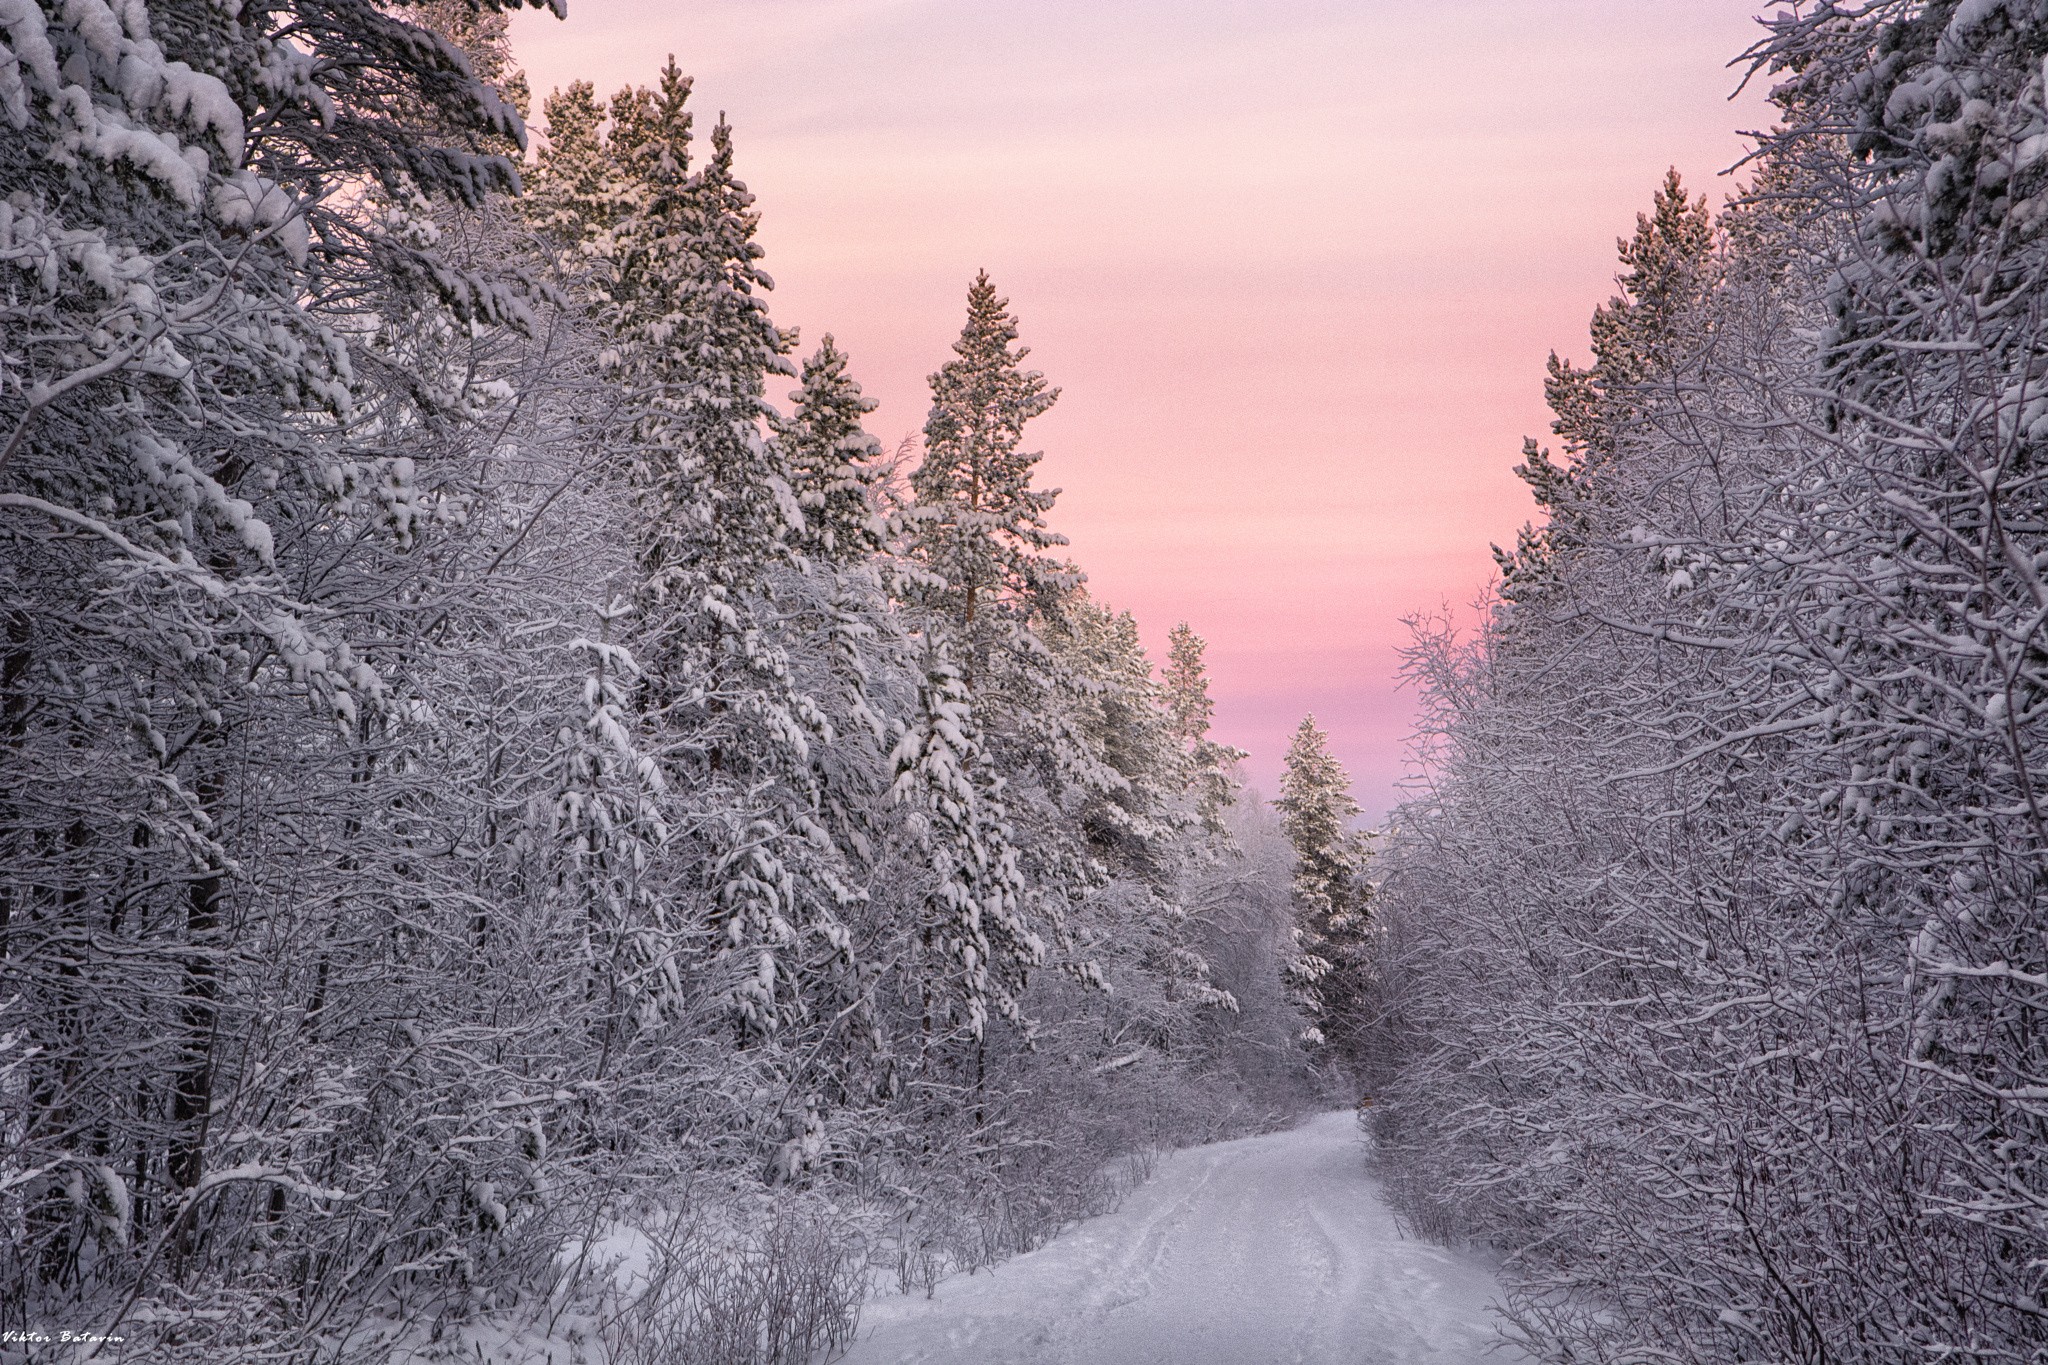 General 2048x1365 pine trees forest path purple sky winter nature